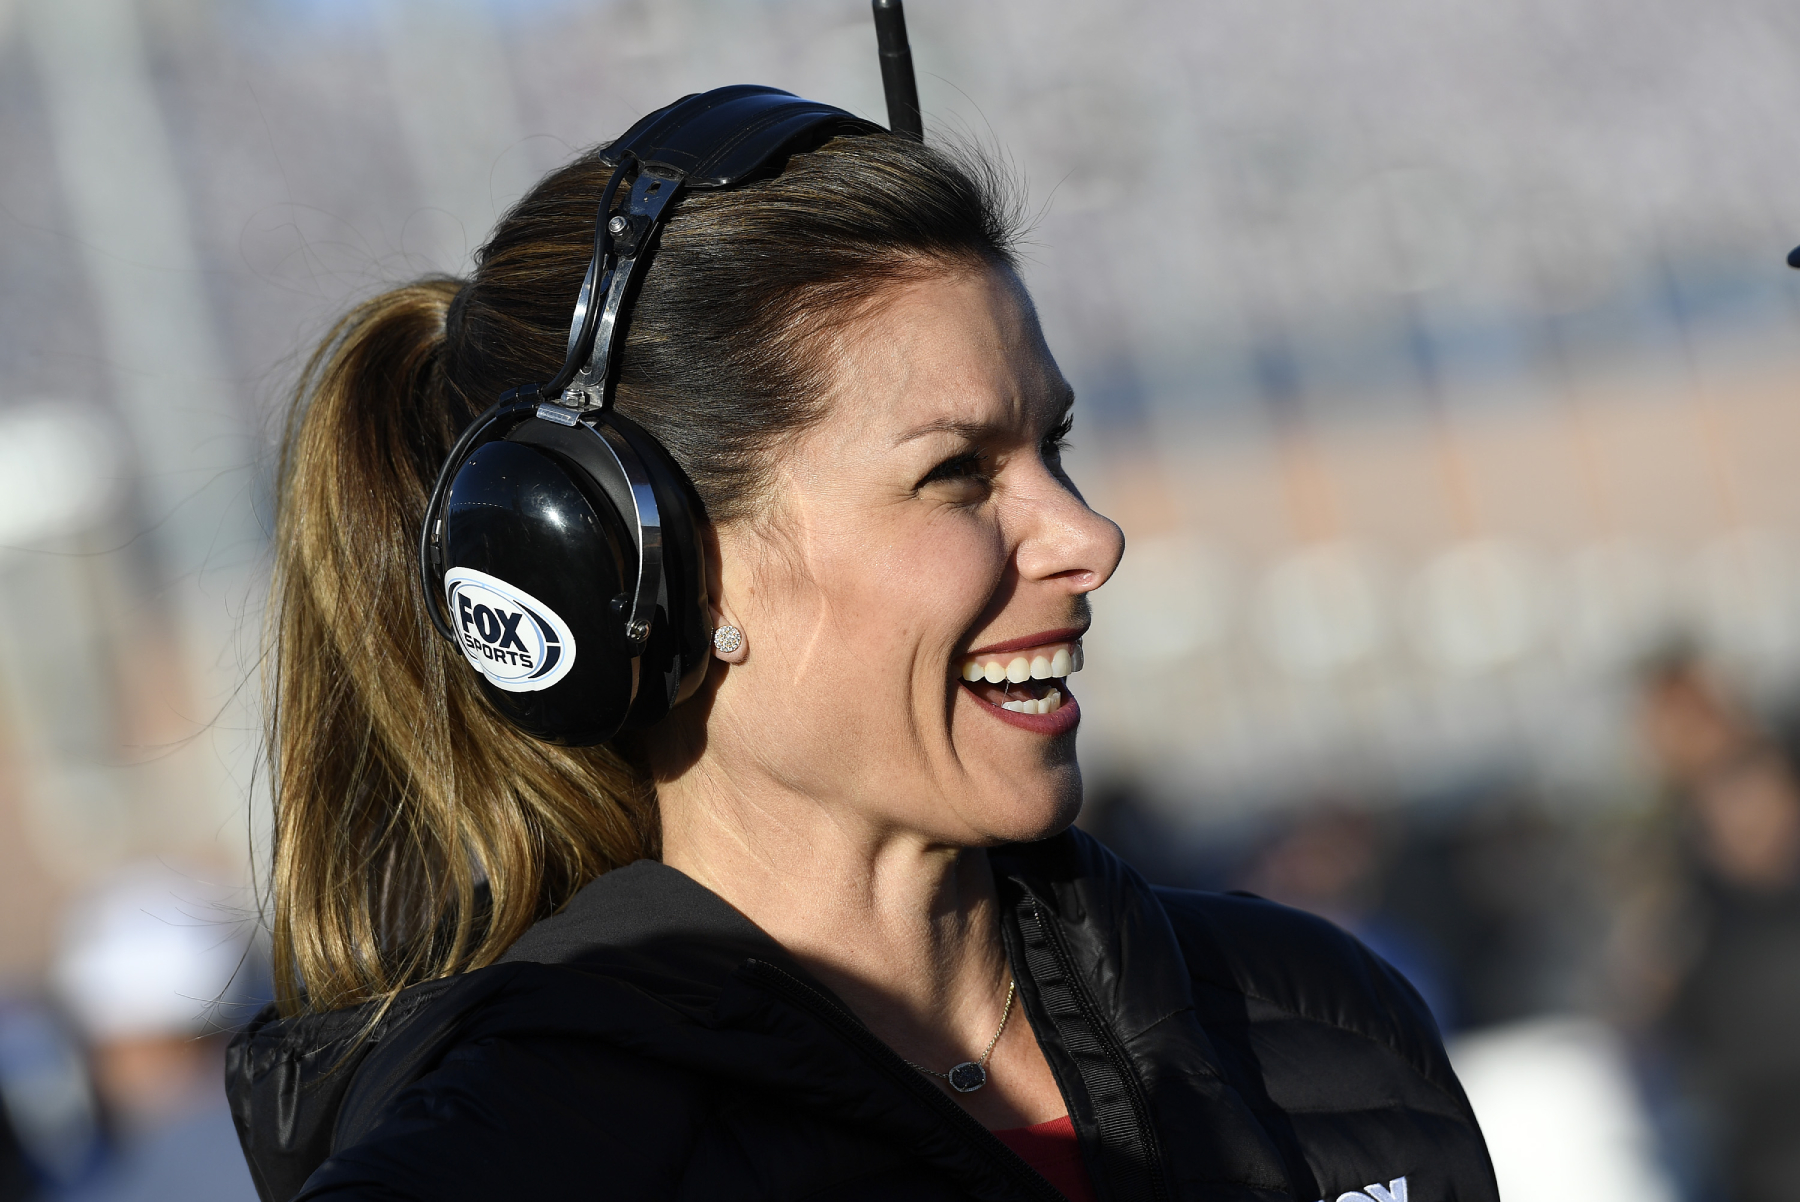 NASCAR reporter Jamie Little has had a successful career with ESPN and FOX Sports. So, why did she choose to leave ESPN?